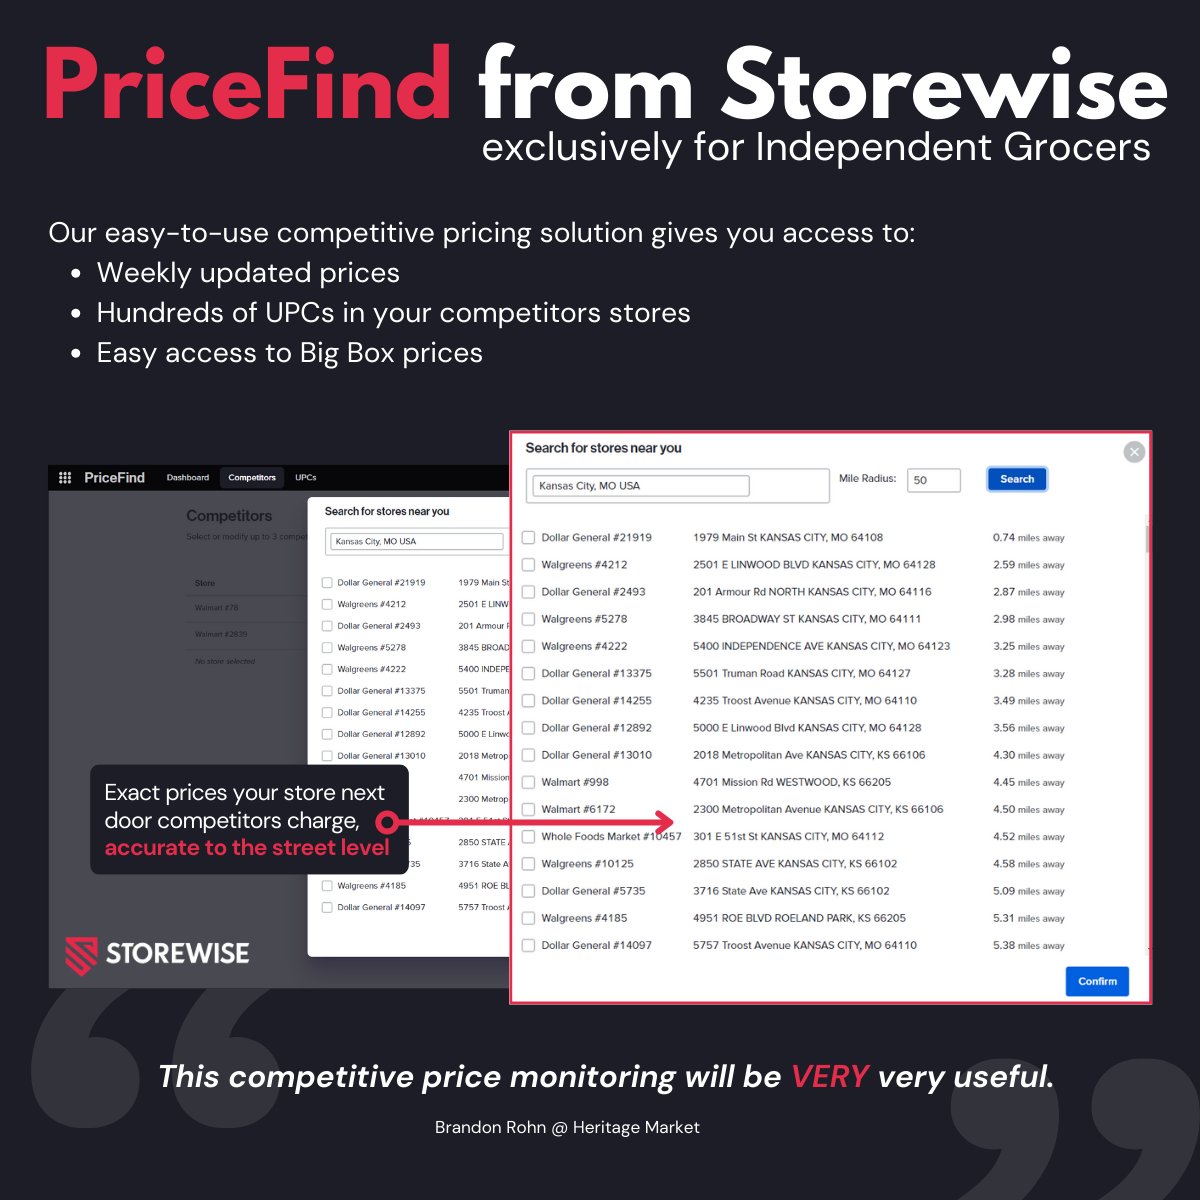 Say goodbye to inconsistent and out-of-date competitive price reports and say hello to PriceFind from Storewise. Gain a store next door view of your local competition to help you fight big box stores.

Sign up today: zurl.co/SI7z

#grocerytech #competitivepricing